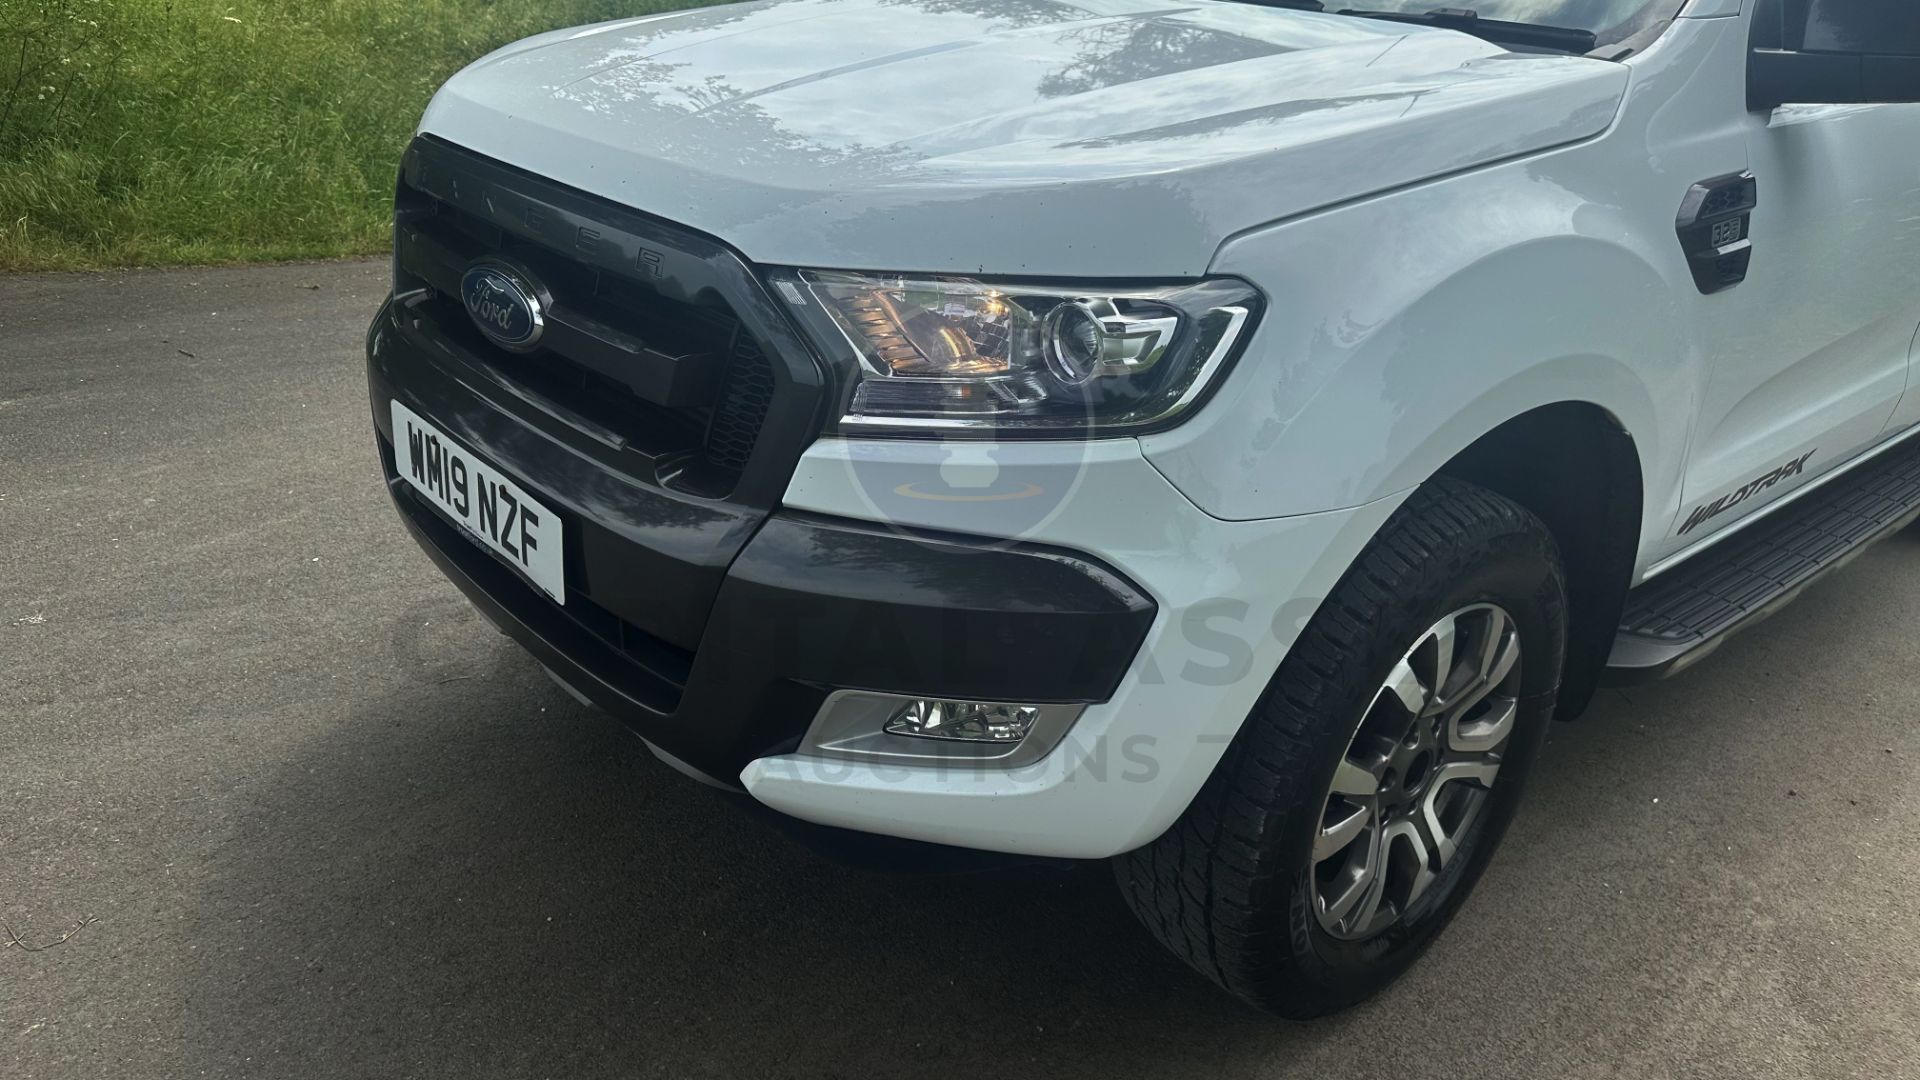 (ON SALE) FORD RANGER *WILDTRAK* DOUBLE CAB PICK-UP (2019 - EURO 6) 3.2 TDCI - AUTOMATIC (1 OWNER) - Image 17 of 50